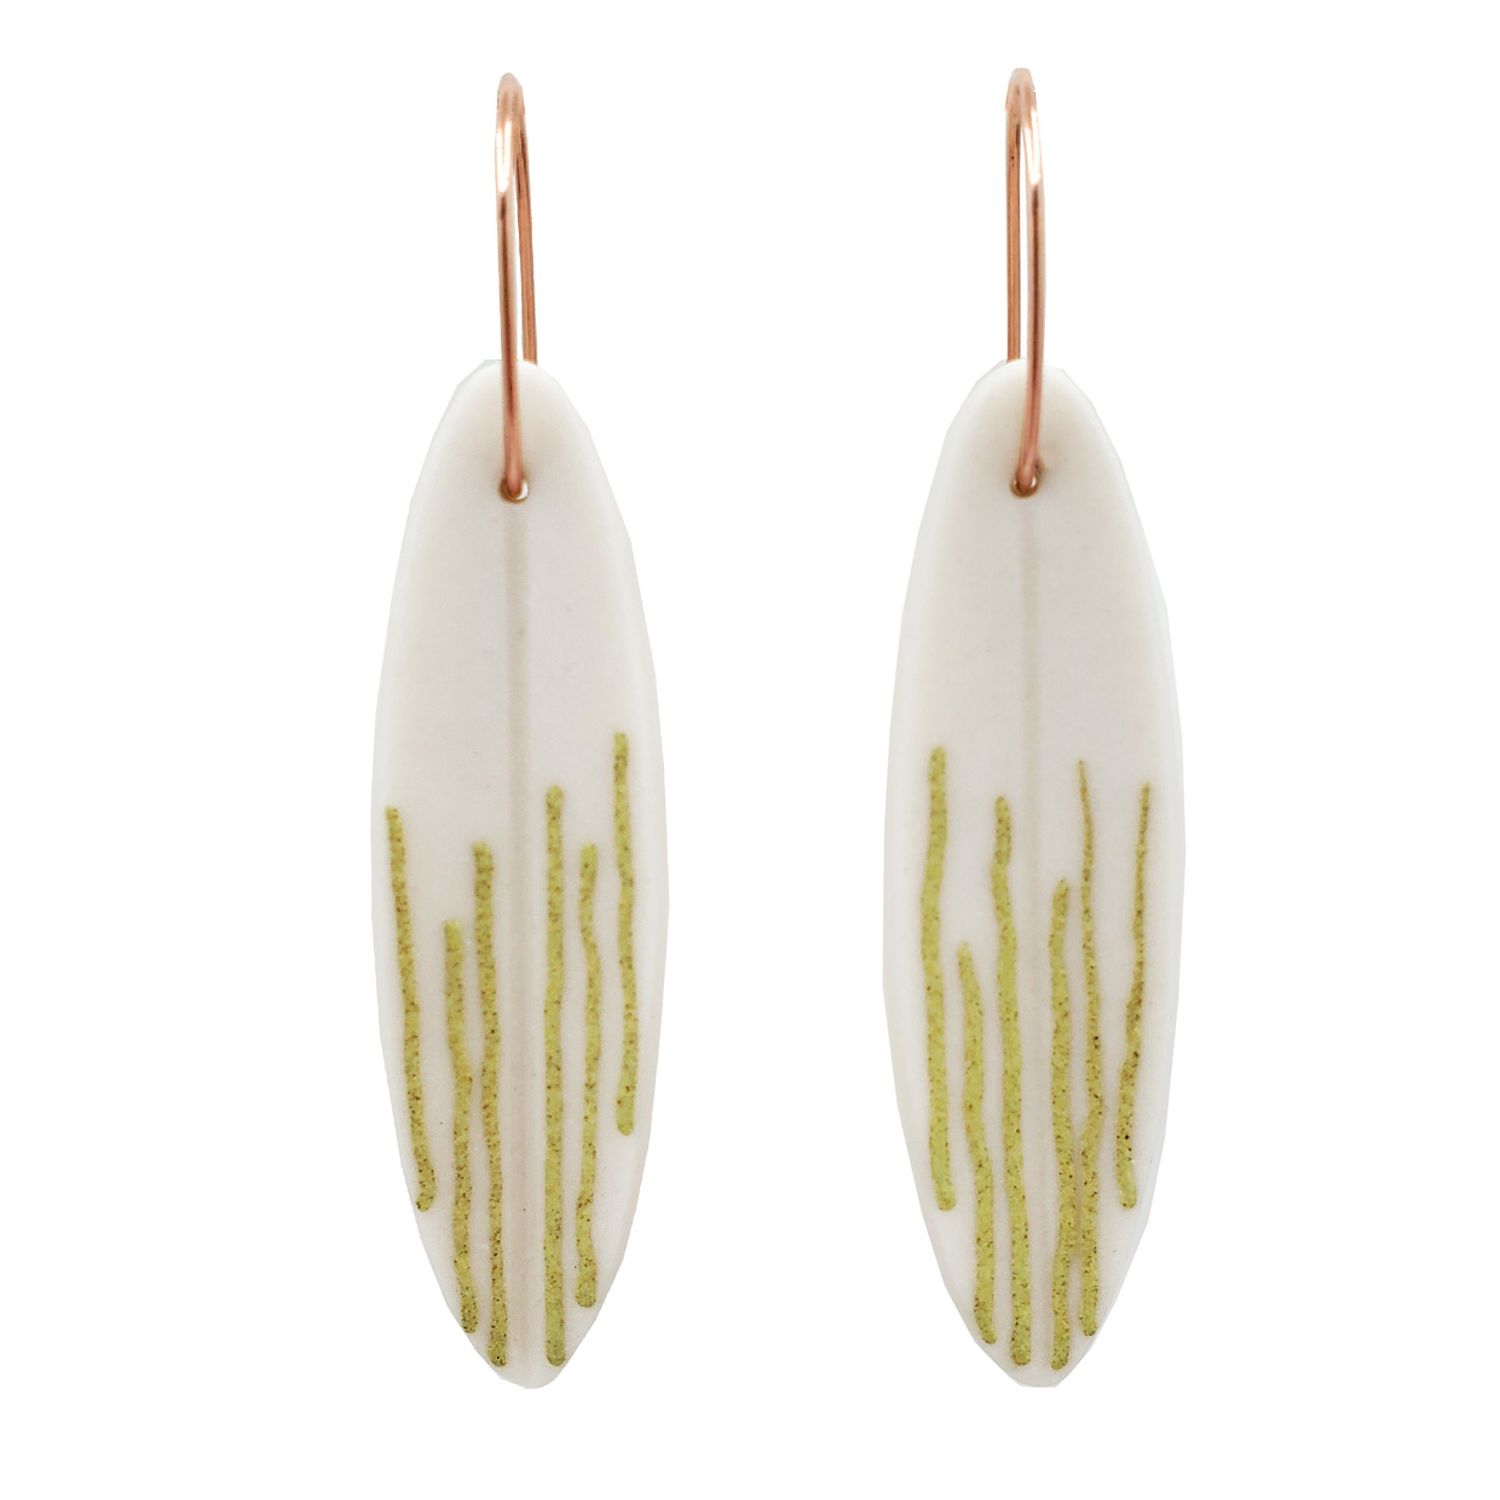 Chayle Jewellery: Large Willow Earrings – Porcelain & Rose Gold Filled Product Image 1 of 1